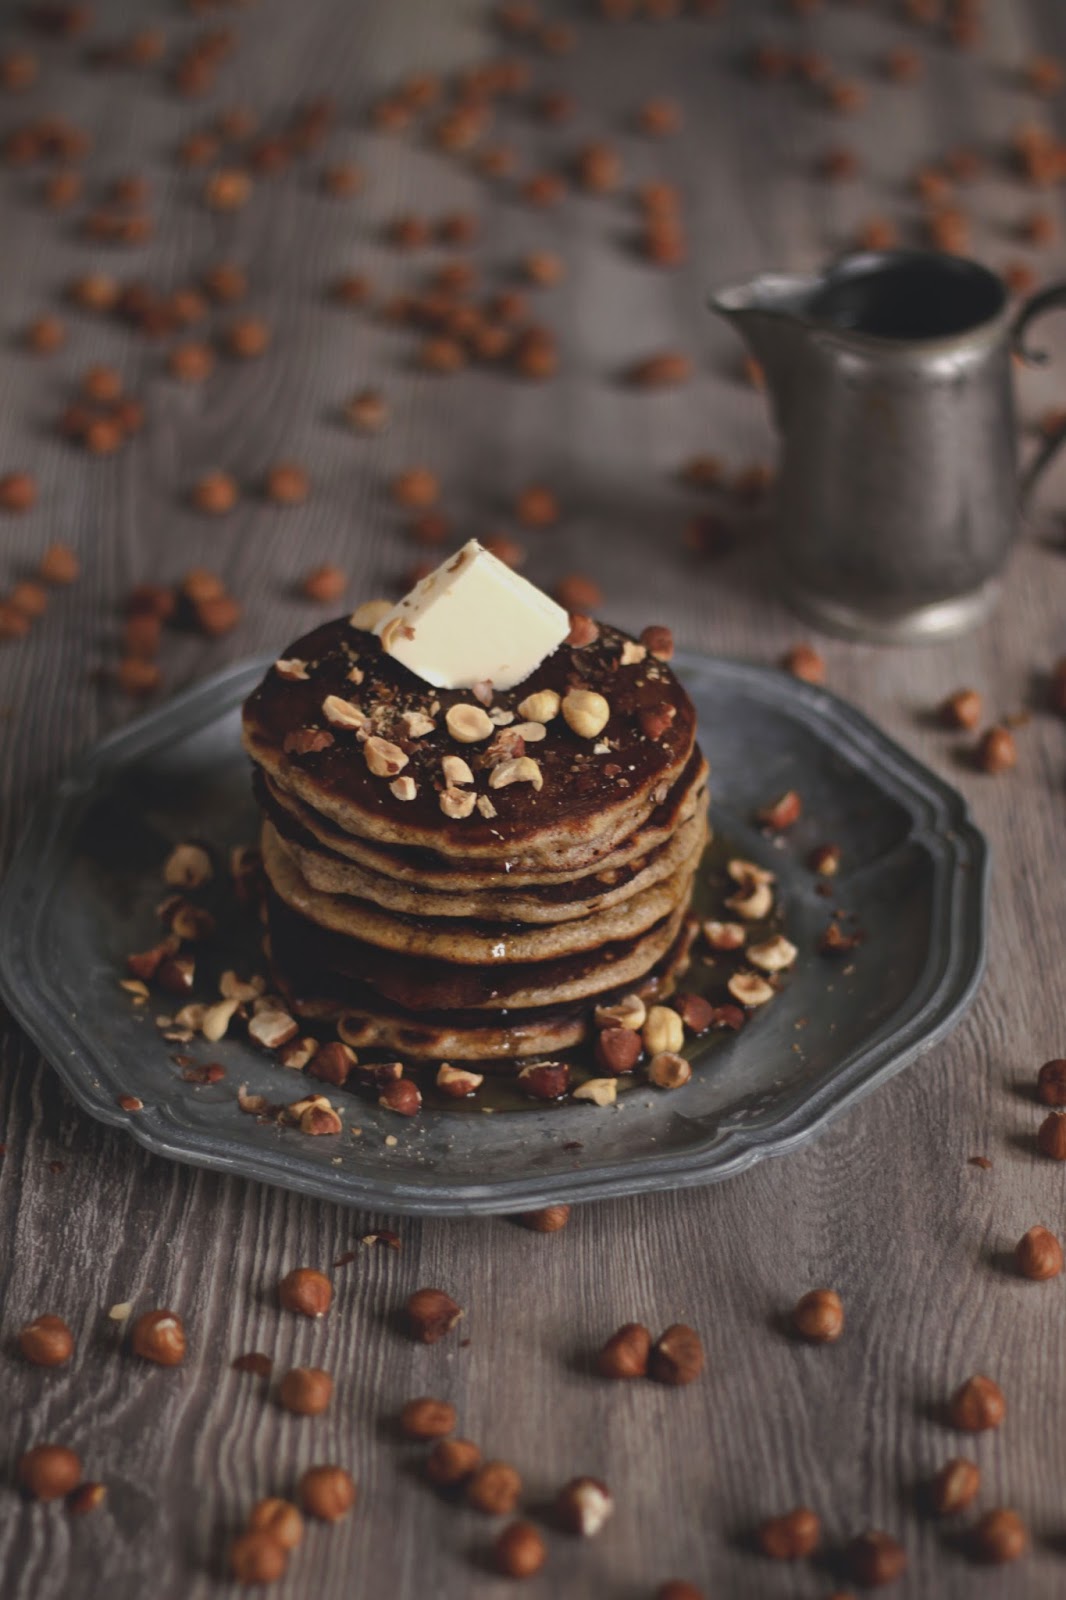 Pancake Stories: Classy Hazelnut Pancakes with Butter and Maple Syrup